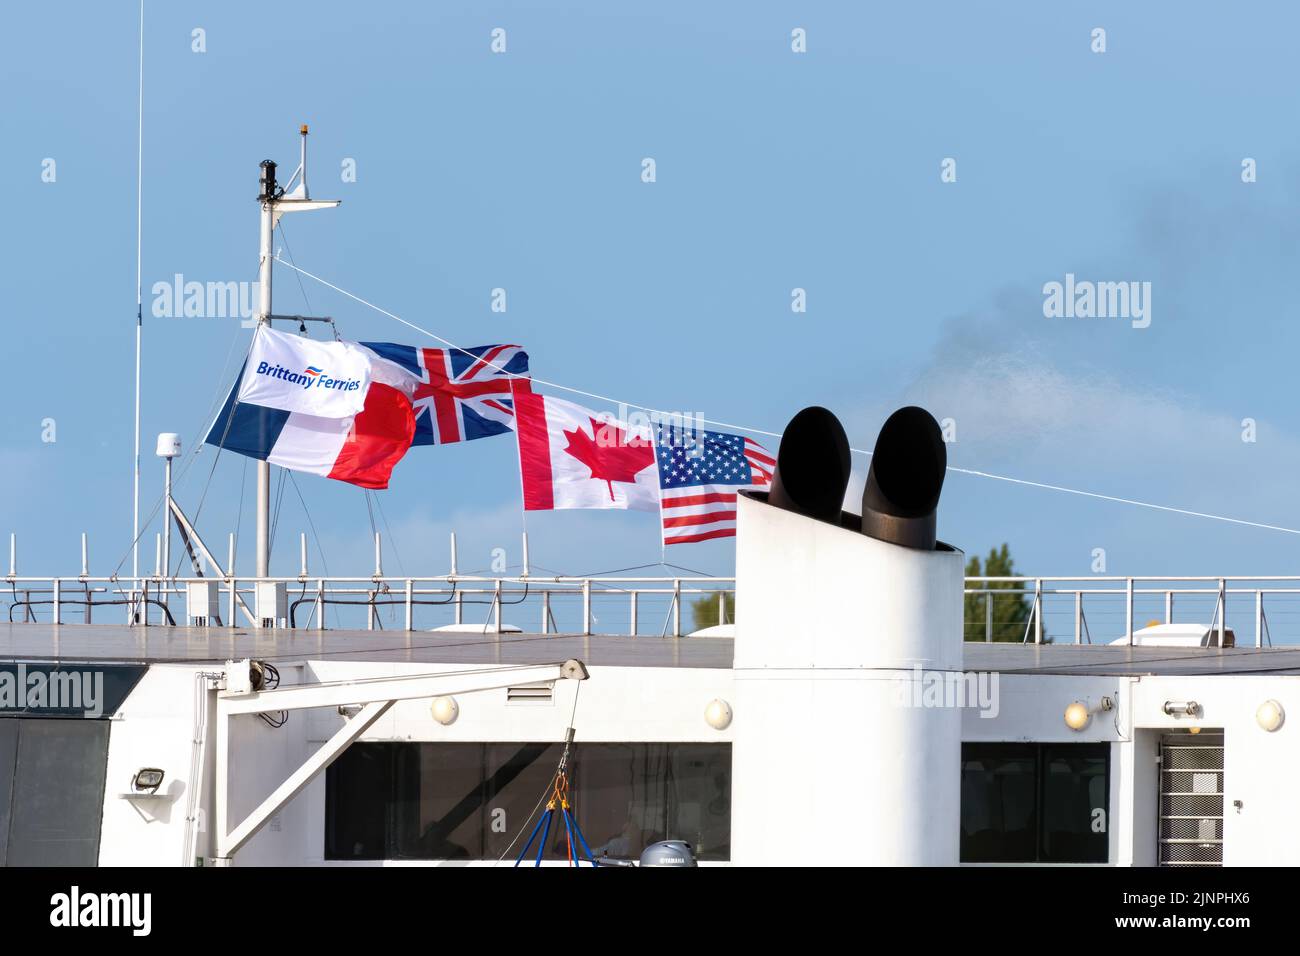 The national flags of France, UK, and USA Canada flying from a French ferry to mark the 75th anniversary of D-Day - June 2019. Stock Photo